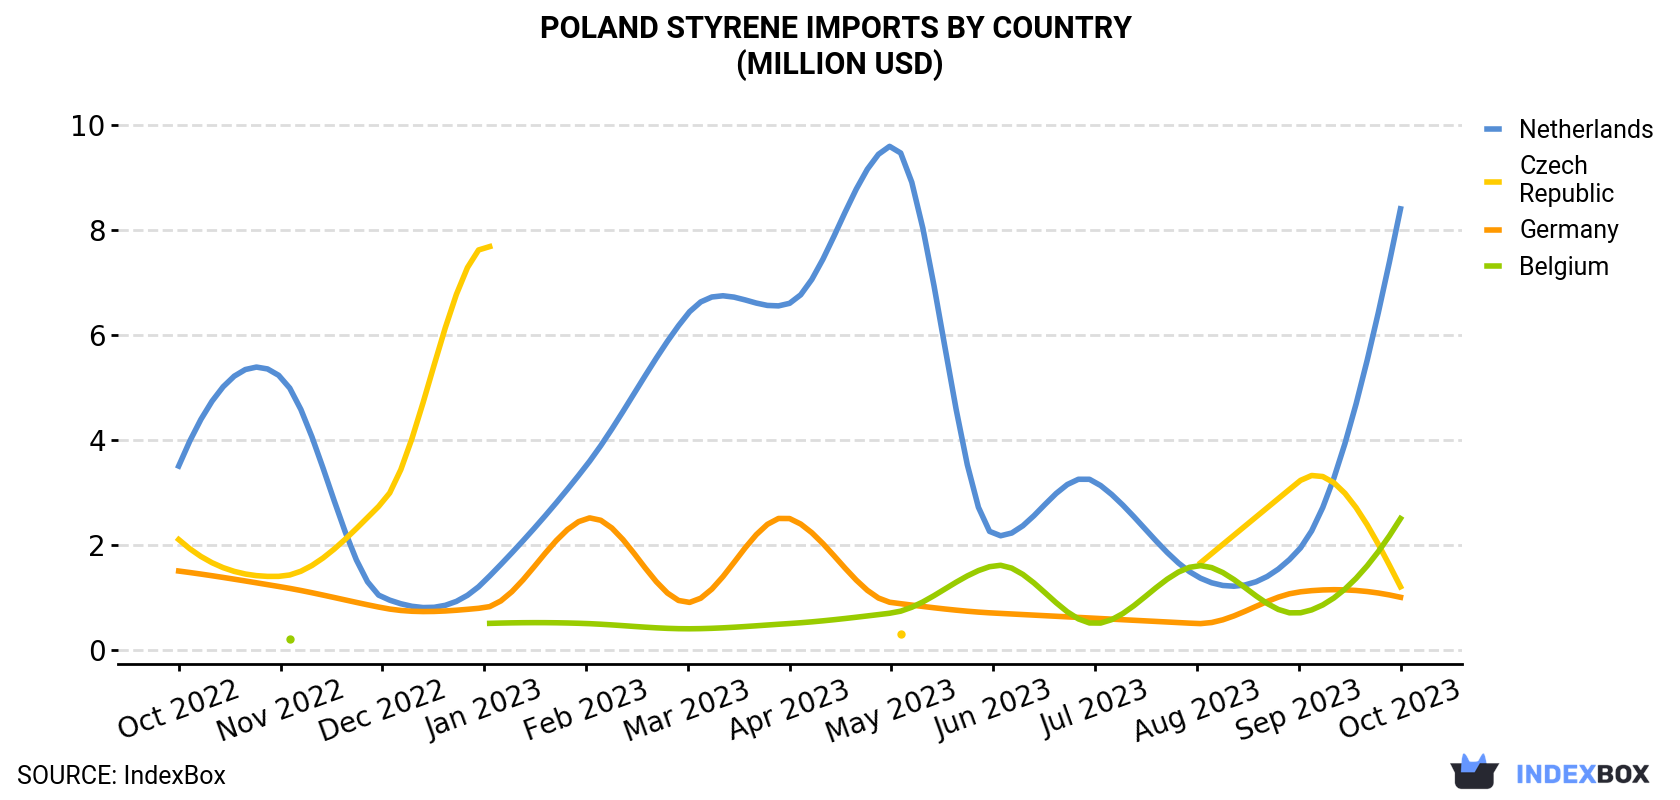 Poland Styrene Imports By Country (Million USD)